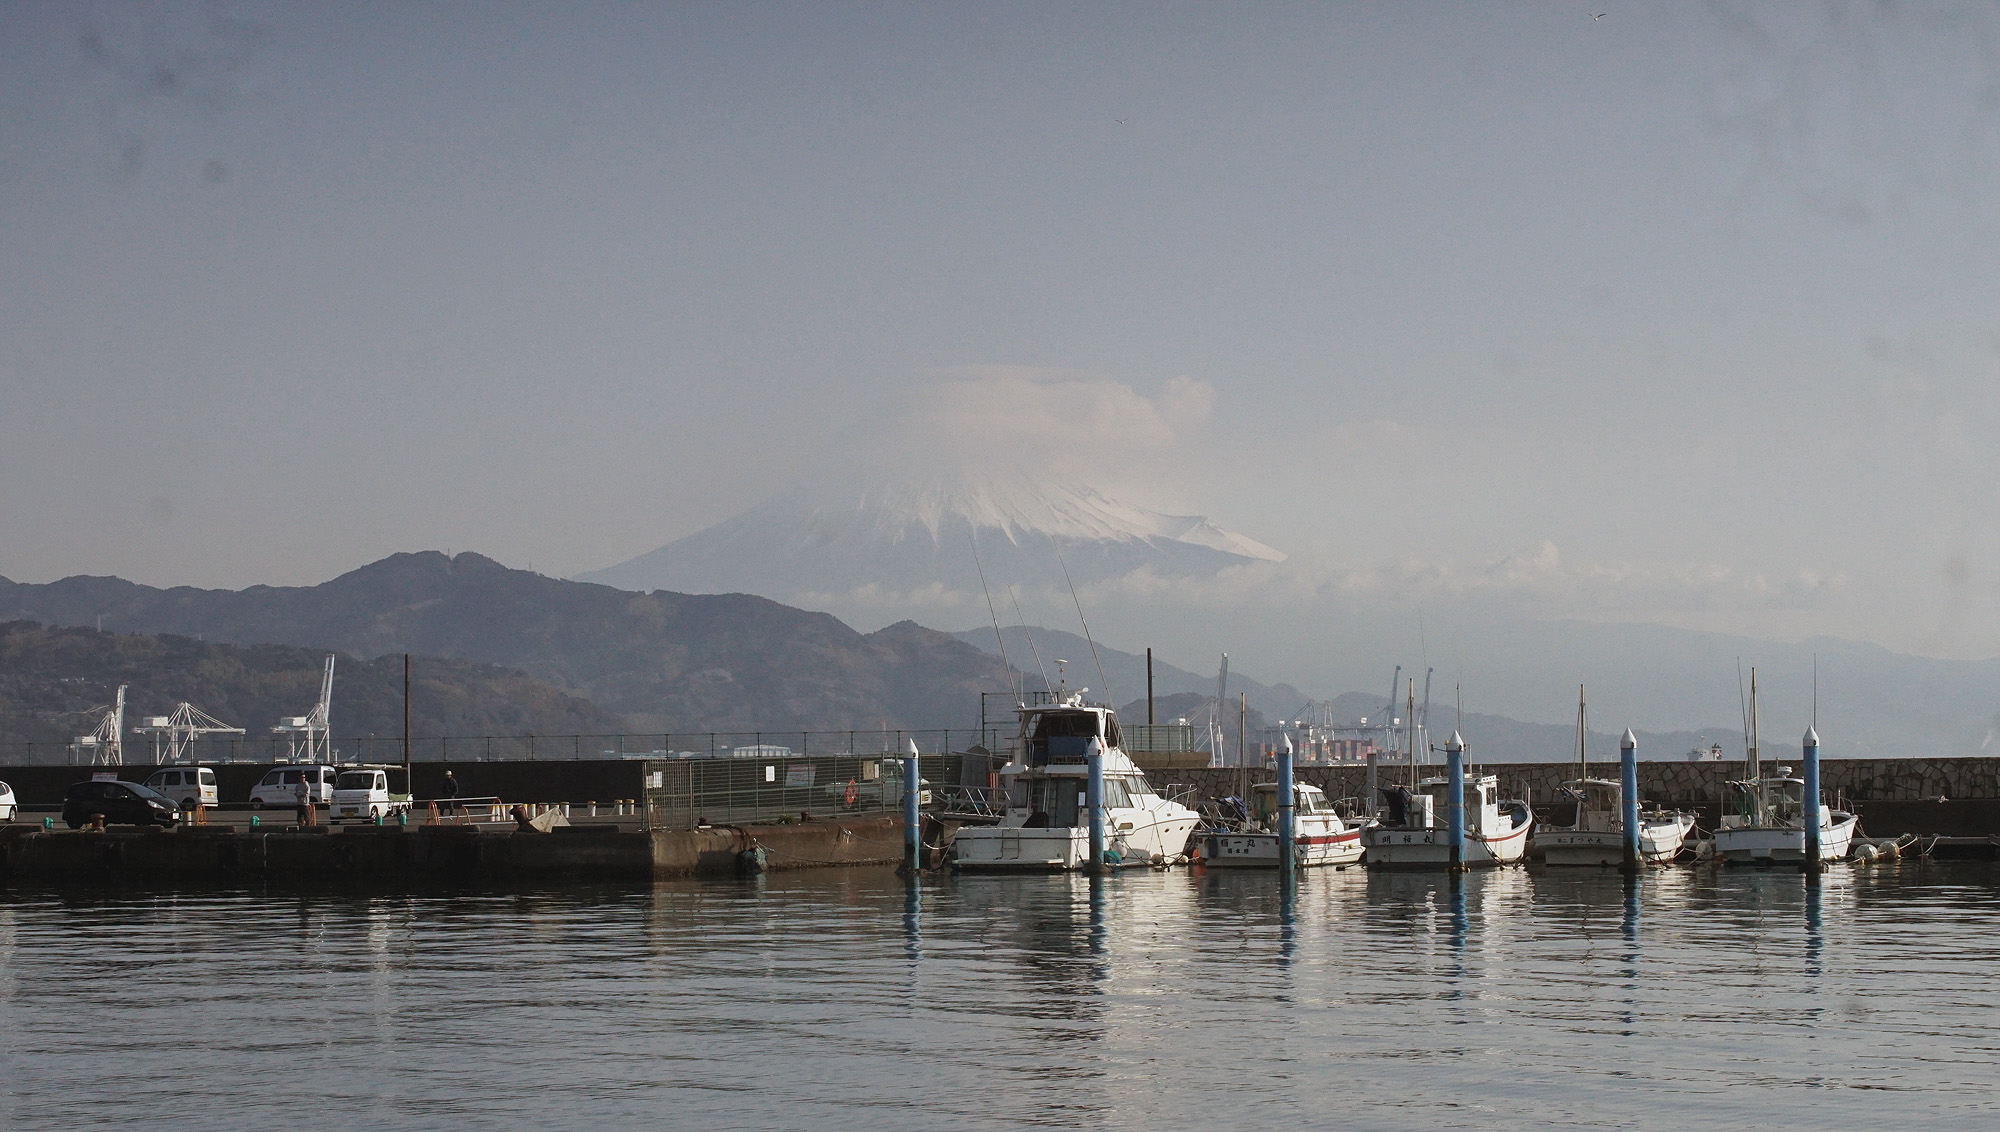 a look at mount fuji from our mooring spot, a marina is visible